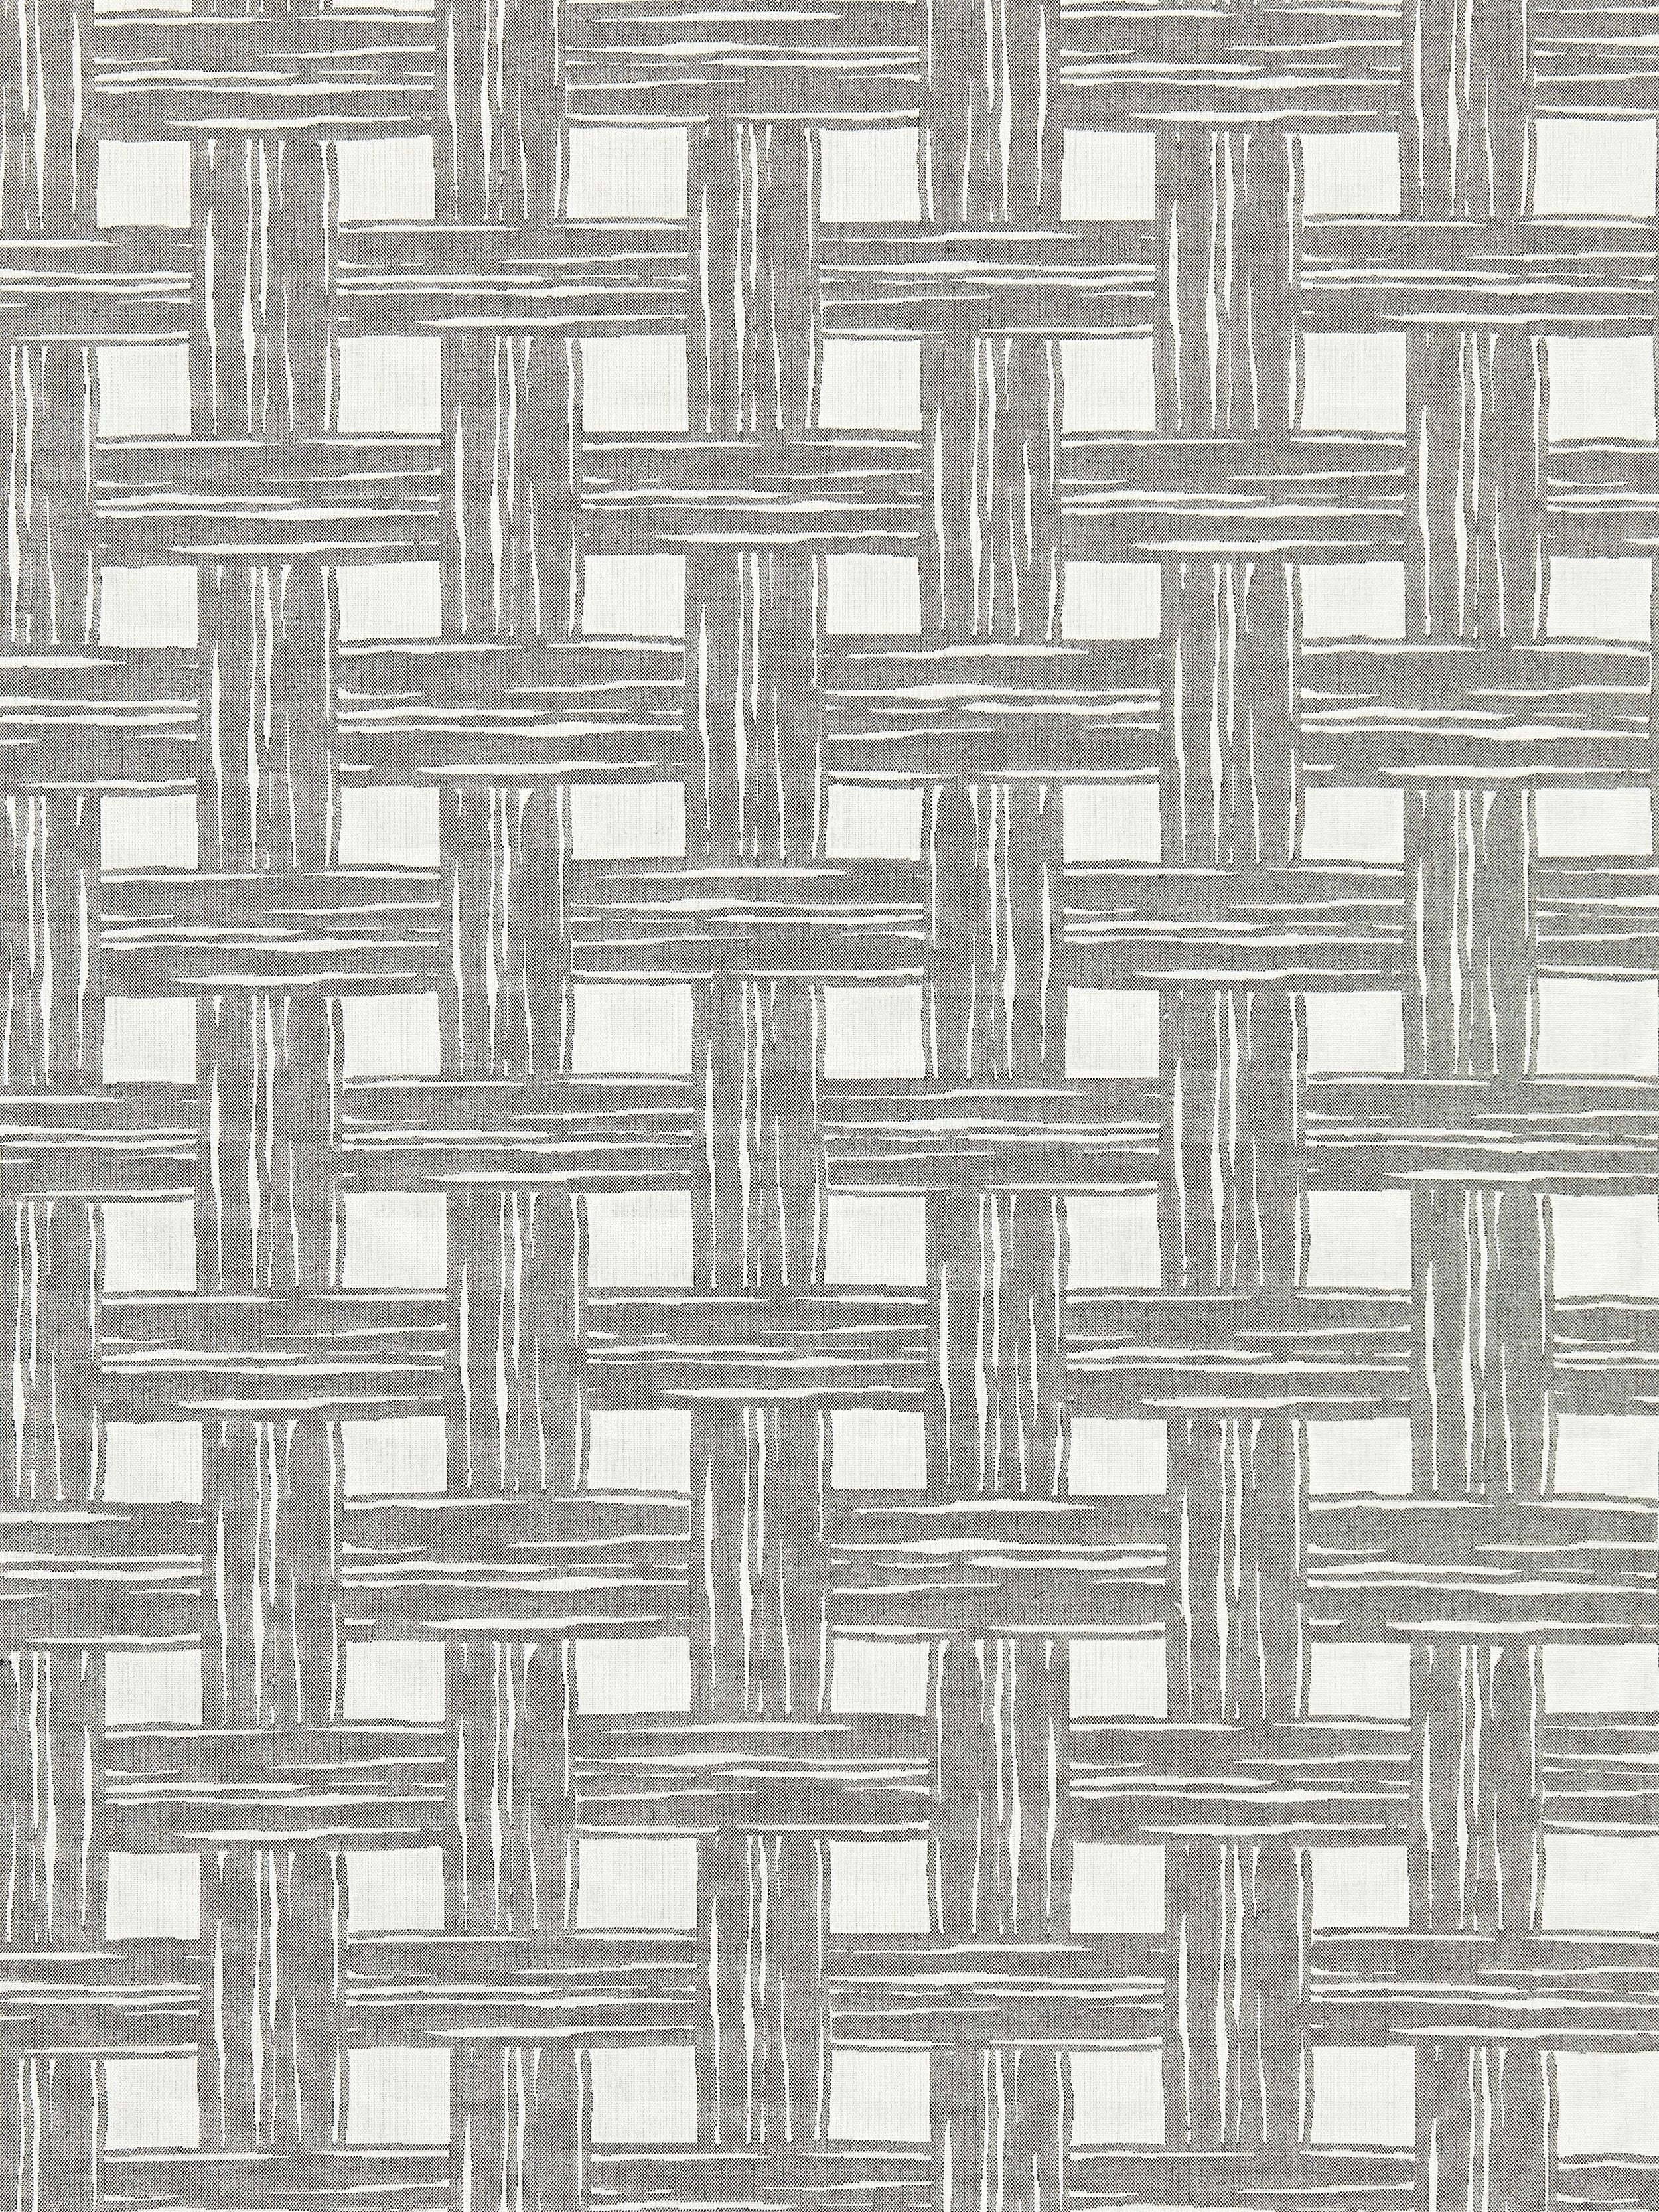 Bamboo Lattice fabric in stone color - pattern number SC 000327059 - by Scalamandre in the Scalamandre Fabrics Book 1 collection